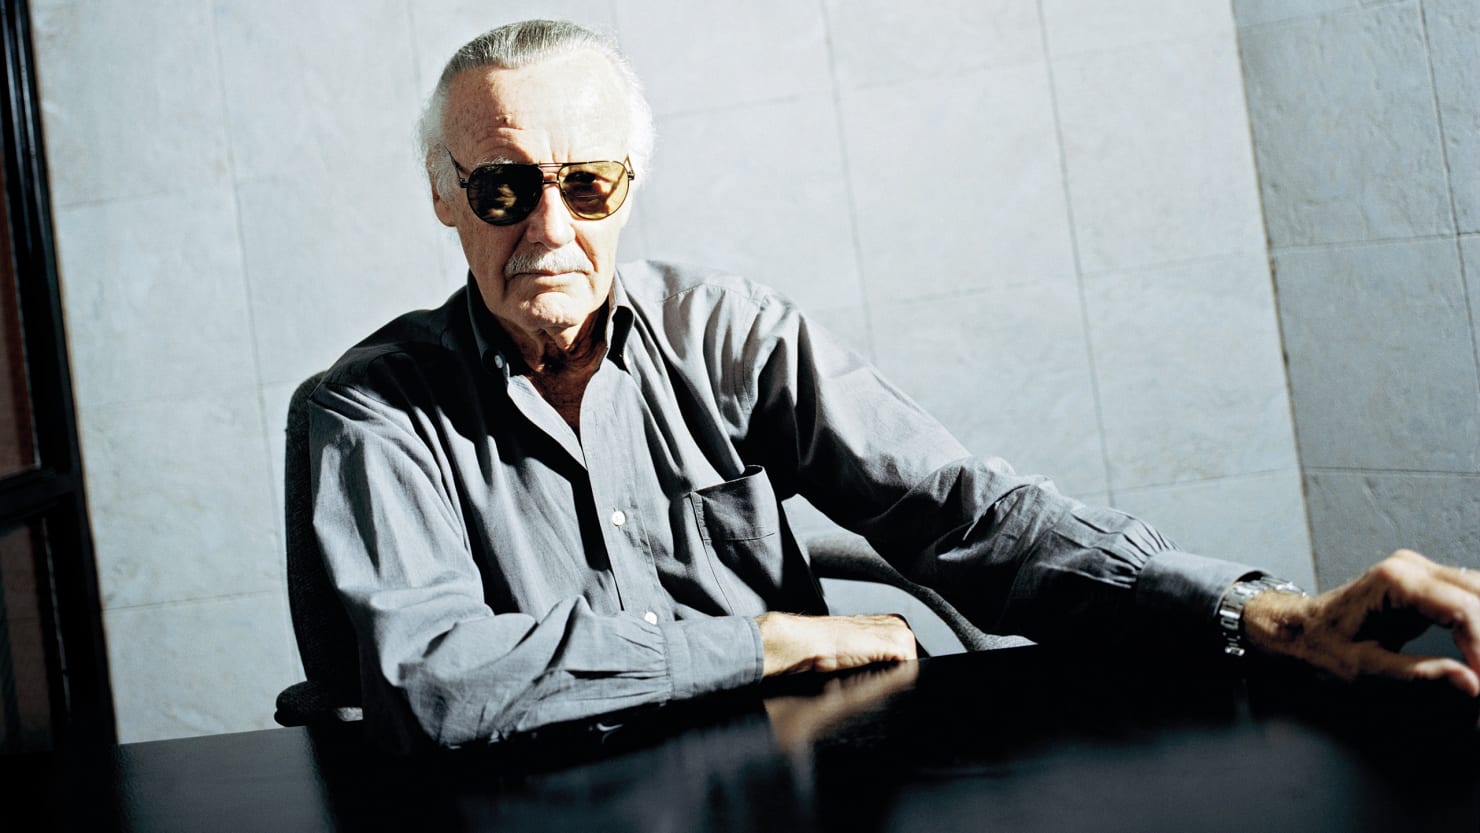 Stan Lee Breaks His Silence: Those I Trusted Betrayed Me